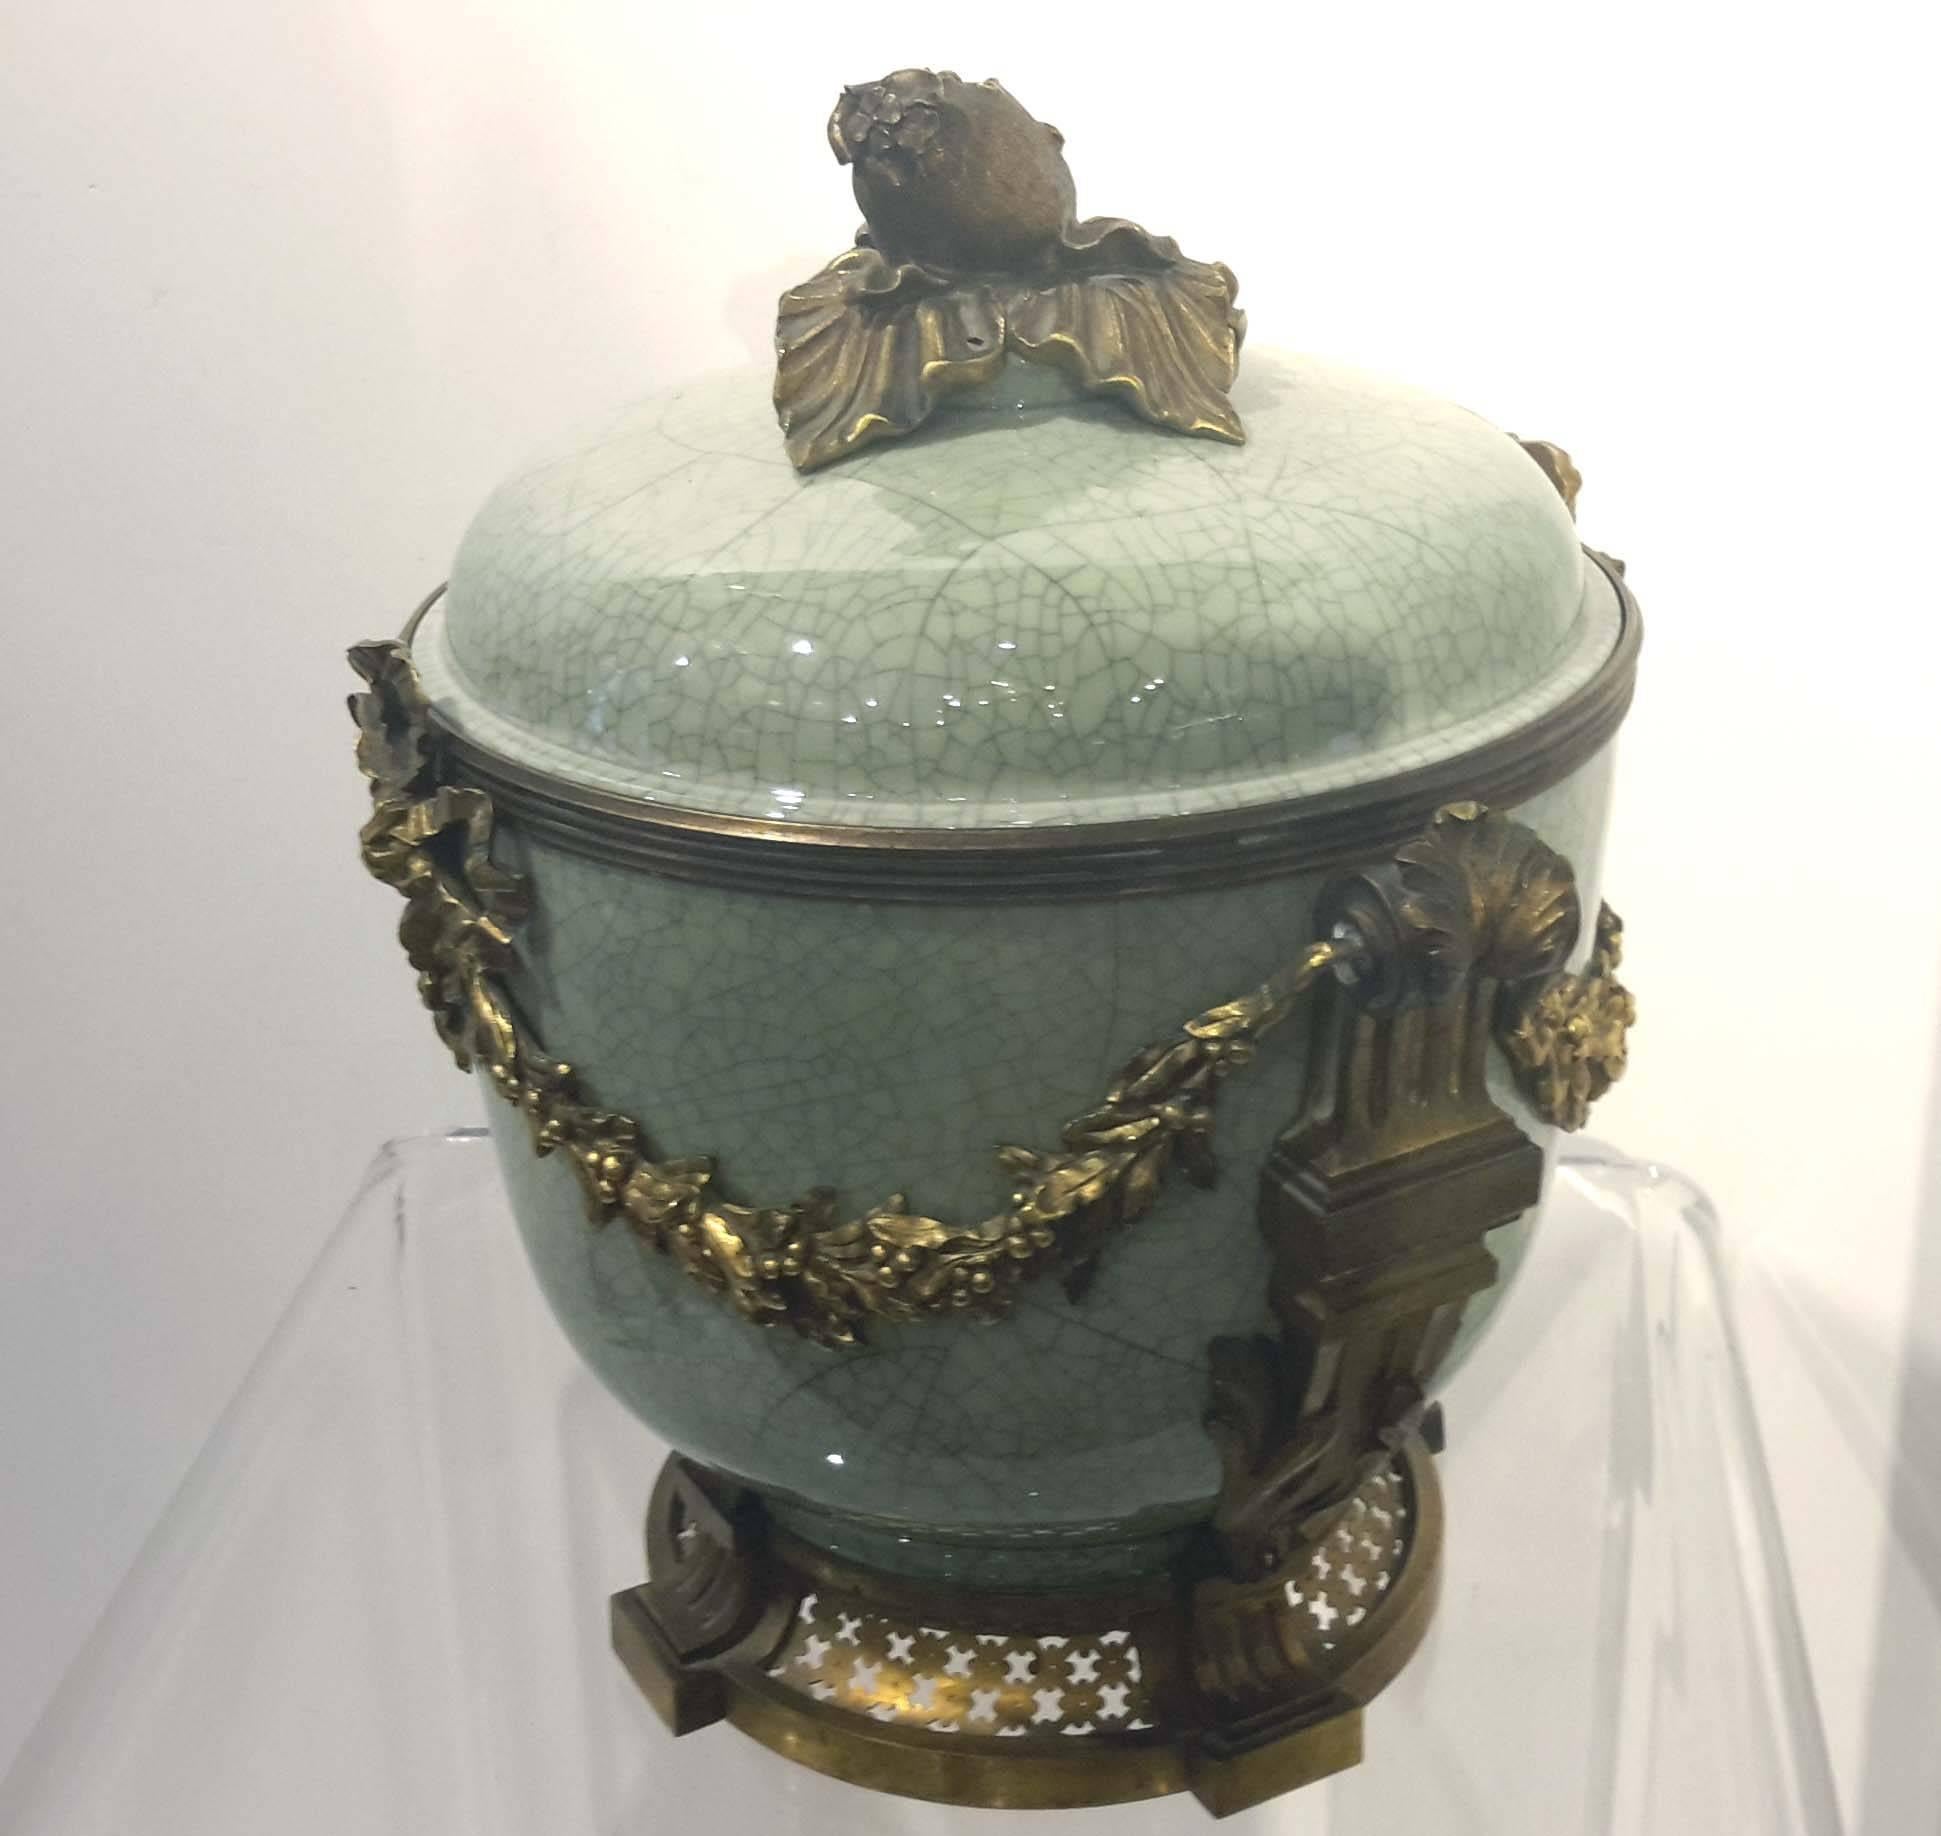 Gilt bronze-mounted celadon porcelain covered bowl, French, circa 1890. Great quality bronze mounts.